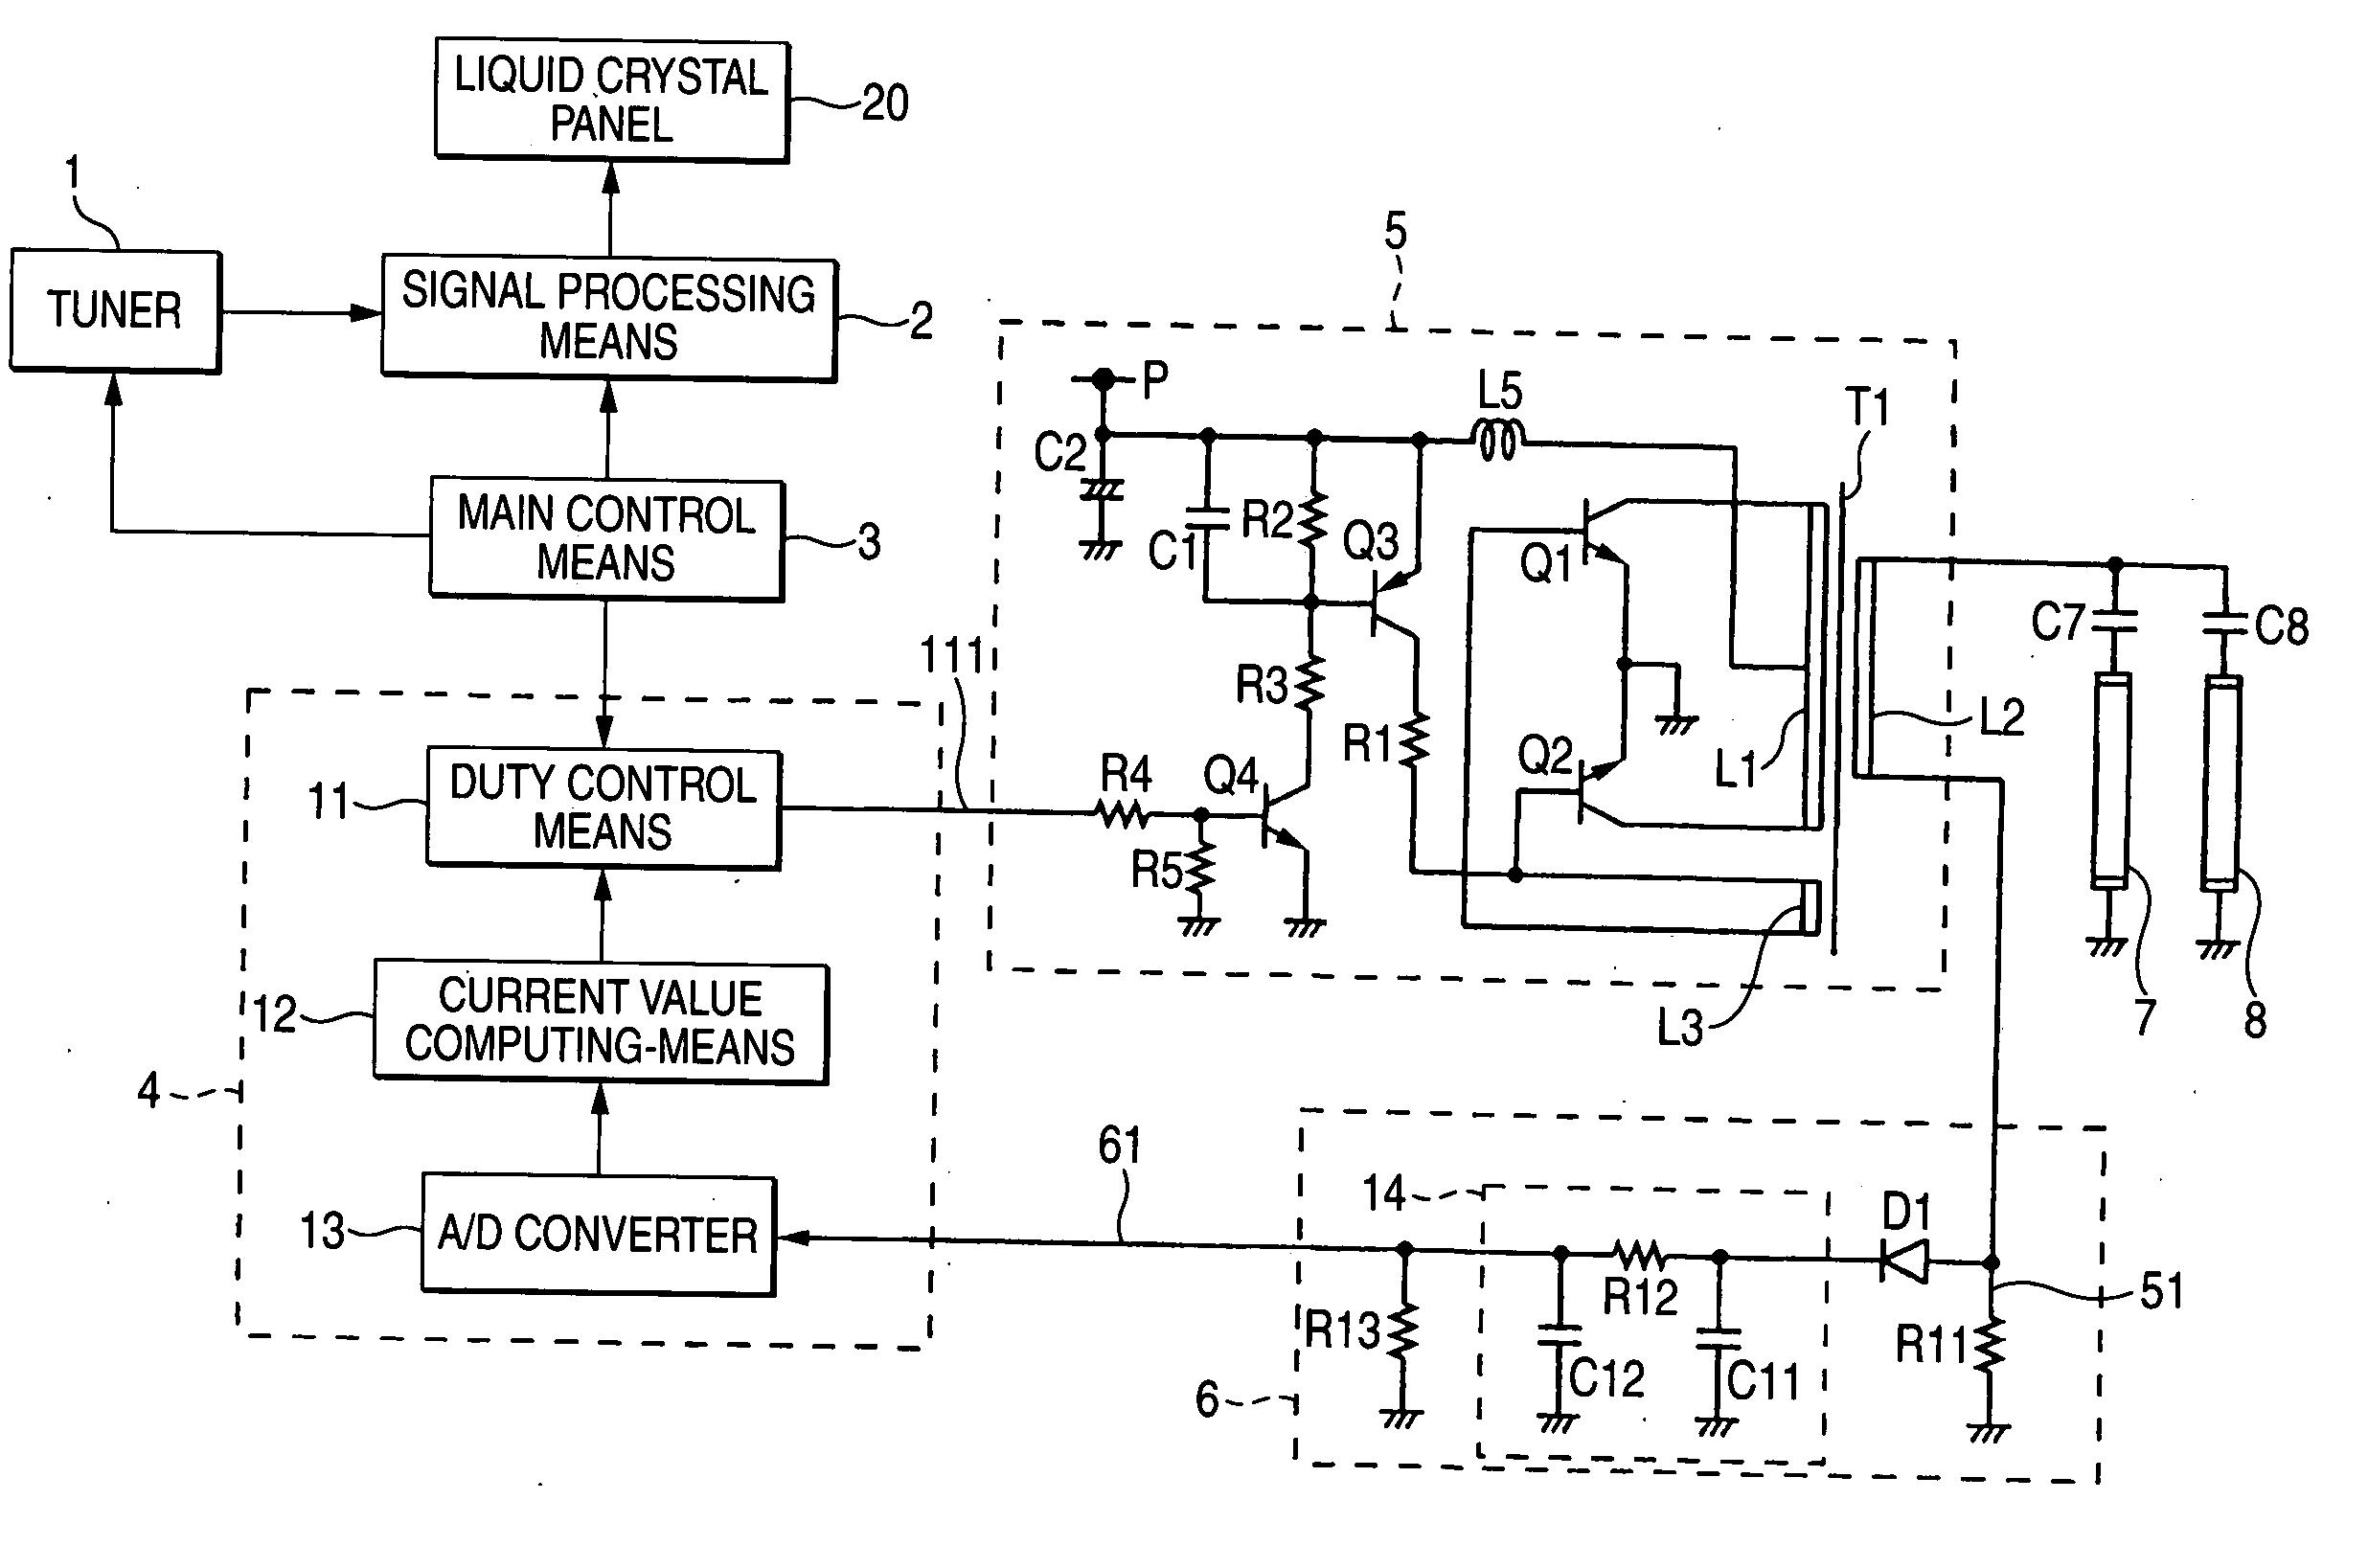 Television receiver and cold-cathode tube dimmer